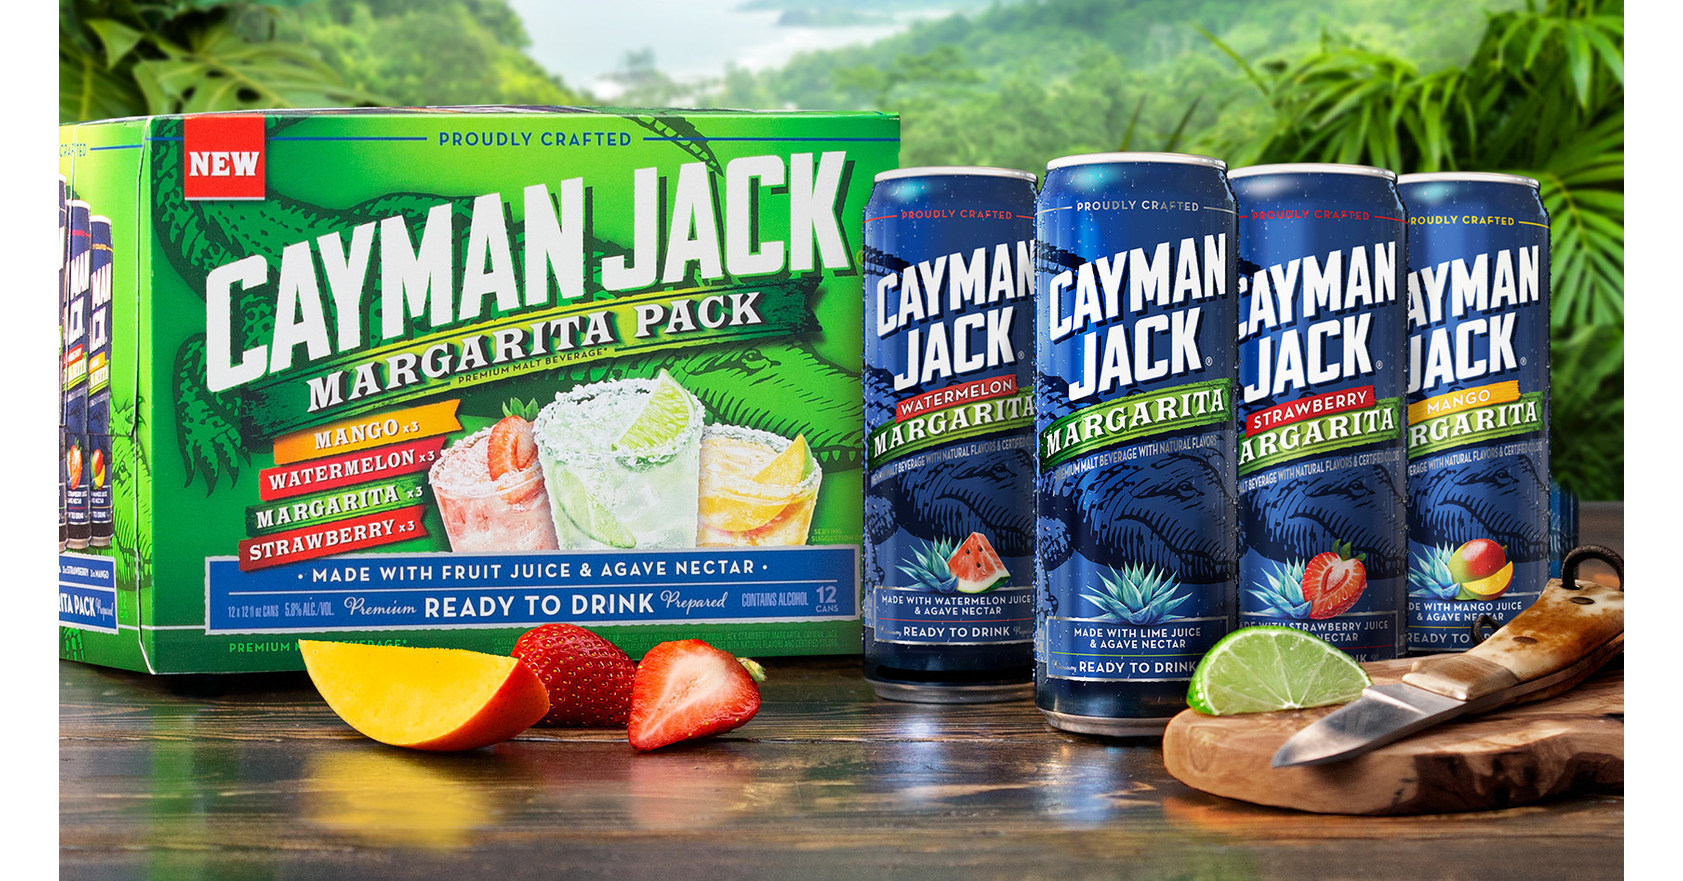 discover-more-legendary-tastes-with-cayman-jack-s-new-margarita